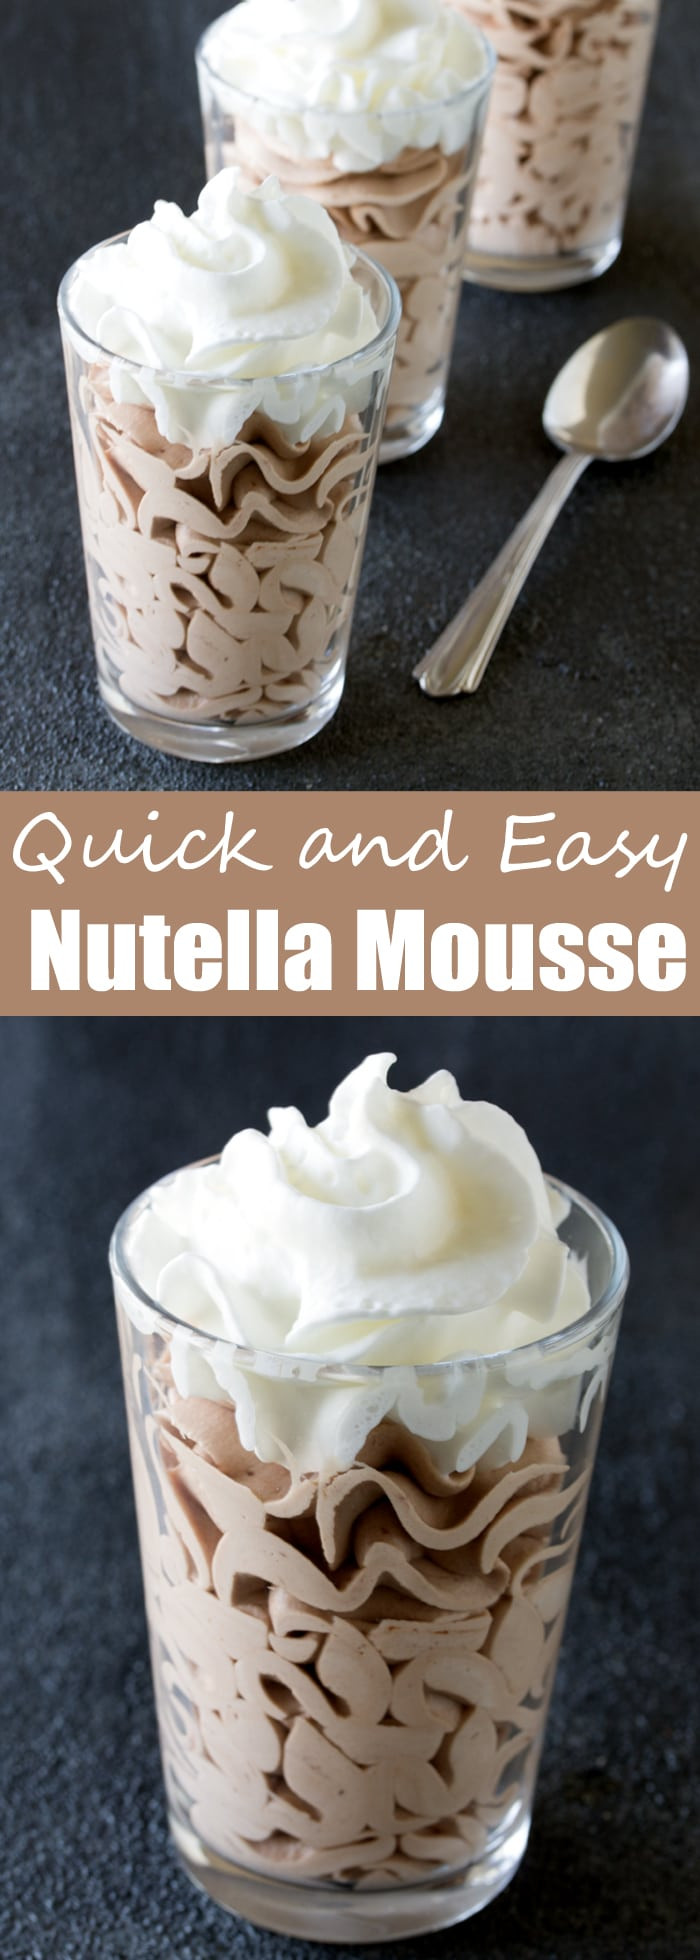 Easy Nutella Dessert
 Keep your kitchen cool with 10 easy no bake dessert recipes